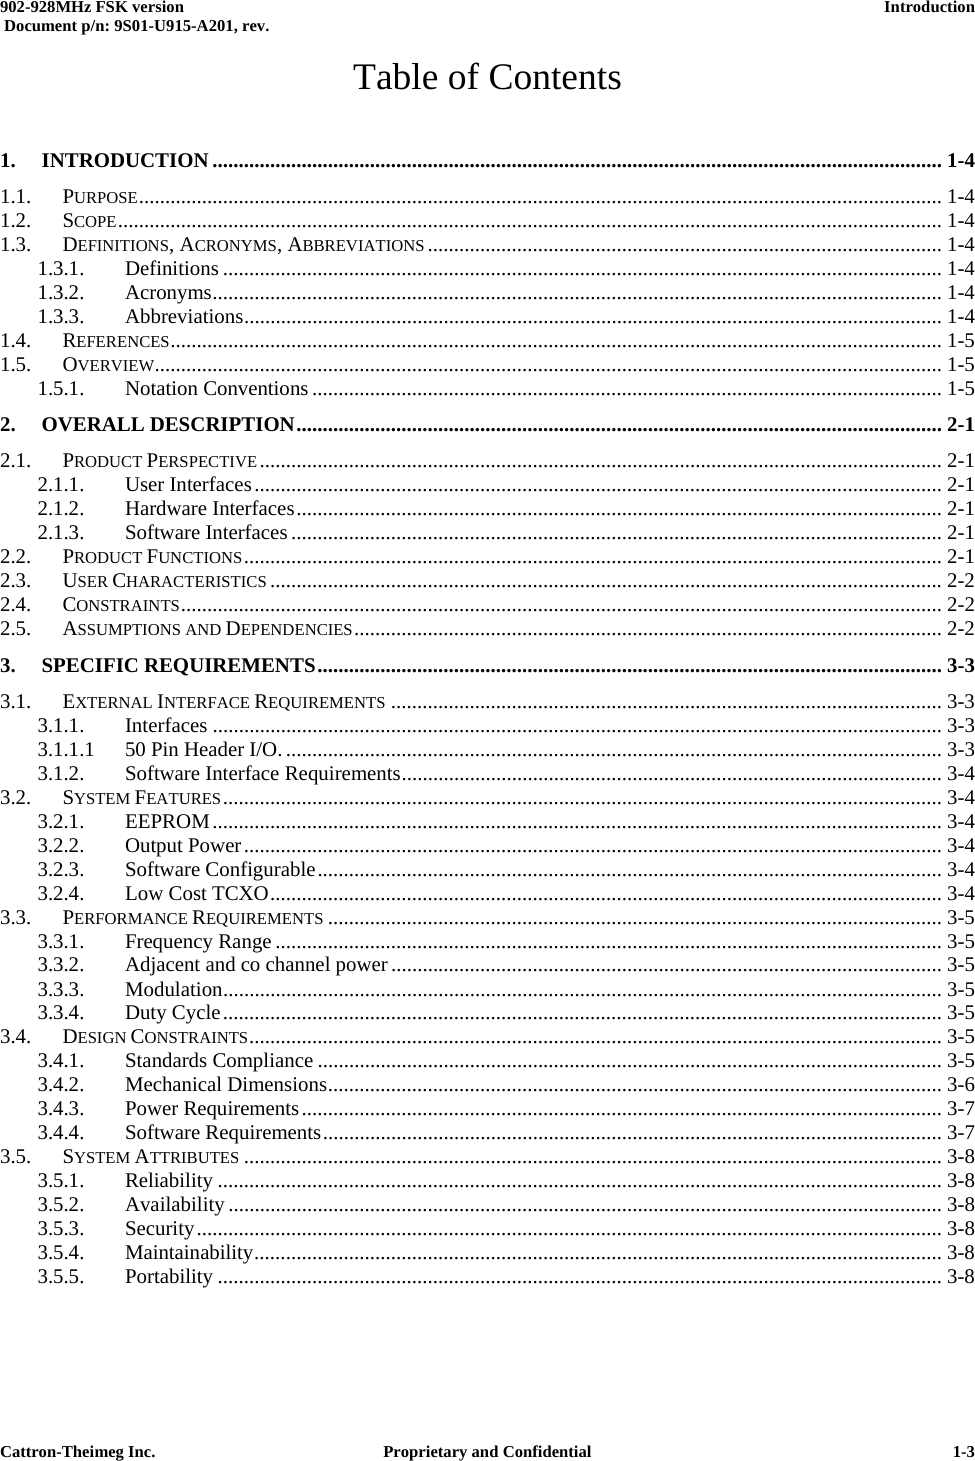  902-928MHz FSK version      Introduction   Document p/n: 9S01-U915-A201, rev.   Cattron-Theimeg Inc.  Proprietary and Confidential   1-3Table of Contents 1. INTRODUCTION ........................................................................................................................................... 1-4 1.1. PURPOSE......................................................................................................................................................... 1-4 1.2. SCOPE............................................................................................................................................................. 1-4 1.3. DEFINITIONS, ACRONYMS, ABBREVIATIONS .................................................................................................. 1-4 1.3.1. Definitions ......................................................................................................................................... 1-4 1.3.2. Acronyms........................................................................................................................................... 1-4 1.3.3. Abbreviations..................................................................................................................................... 1-4 1.4. REFERENCES................................................................................................................................................... 1-5 1.5. OVERVIEW...................................................................................................................................................... 1-5 1.5.1. Notation Conventions ........................................................................................................................ 1-5 2. OVERALL DESCRIPTION........................................................................................................................... 2-1 2.1. PRODUCT PERSPECTIVE.................................................................................................................................. 2-1 2.1.1. User Interfaces................................................................................................................................... 2-1 2.1.2. Hardware Interfaces........................................................................................................................... 2-1 2.1.3. Software Interfaces ............................................................................................................................ 2-1 2.2. PRODUCT FUNCTIONS..................................................................................................................................... 2-1 2.3. USER CHARACTERISTICS ................................................................................................................................2-2 2.4. CONSTRAINTS................................................................................................................................................. 2-2 2.5. ASSUMPTIONS AND DEPENDENCIES................................................................................................................ 2-2 3. SPECIFIC REQUIREMENTS....................................................................................................................... 3-3 3.1. EXTERNAL INTERFACE REQUIREMENTS ......................................................................................................... 3-3 3.1.1. Interfaces ........................................................................................................................................... 3-3 3.1.1.1 50 Pin Header I/O.............................................................................................................................. 3-3 3.1.2. Software Interface Requirements....................................................................................................... 3-4 3.2. SYSTEM FEATURES......................................................................................................................................... 3-4 3.2.1. EEPROM........................................................................................................................................... 3-4 3.2.2. Output Power..................................................................................................................................... 3-4 3.2.3. Software Configurable....................................................................................................................... 3-4 3.2.4. Low Cost TCXO................................................................................................................................ 3-4 3.3. PERFORMANCE REQUIREMENTS ..................................................................................................................... 3-5 3.3.1. Frequency Range ............................................................................................................................... 3-5 3.3.2. Adjacent and co channel power......................................................................................................... 3-5 3.3.3. Modulation......................................................................................................................................... 3-5 3.3.4. Duty Cycle......................................................................................................................................... 3-5 3.4. DESIGN CONSTRAINTS.................................................................................................................................... 3-5 3.4.1. Standards Compliance ....................................................................................................................... 3-5 3.4.2. Mechanical Dimensions..................................................................................................................... 3-6 3.4.3. Power Requirements.......................................................................................................................... 3-7 3.4.4. Software Requirements...................................................................................................................... 3-7 3.5. SYSTEM ATTRIBUTES ..................................................................................................................................... 3-8 3.5.1. Reliability .......................................................................................................................................... 3-8 3.5.2. Availability ........................................................................................................................................ 3-8 3.5.3. Security.............................................................................................................................................. 3-8 3.5.4. Maintainability................................................................................................................................... 3-8 3.5.5. Portability .......................................................................................................................................... 3-8  